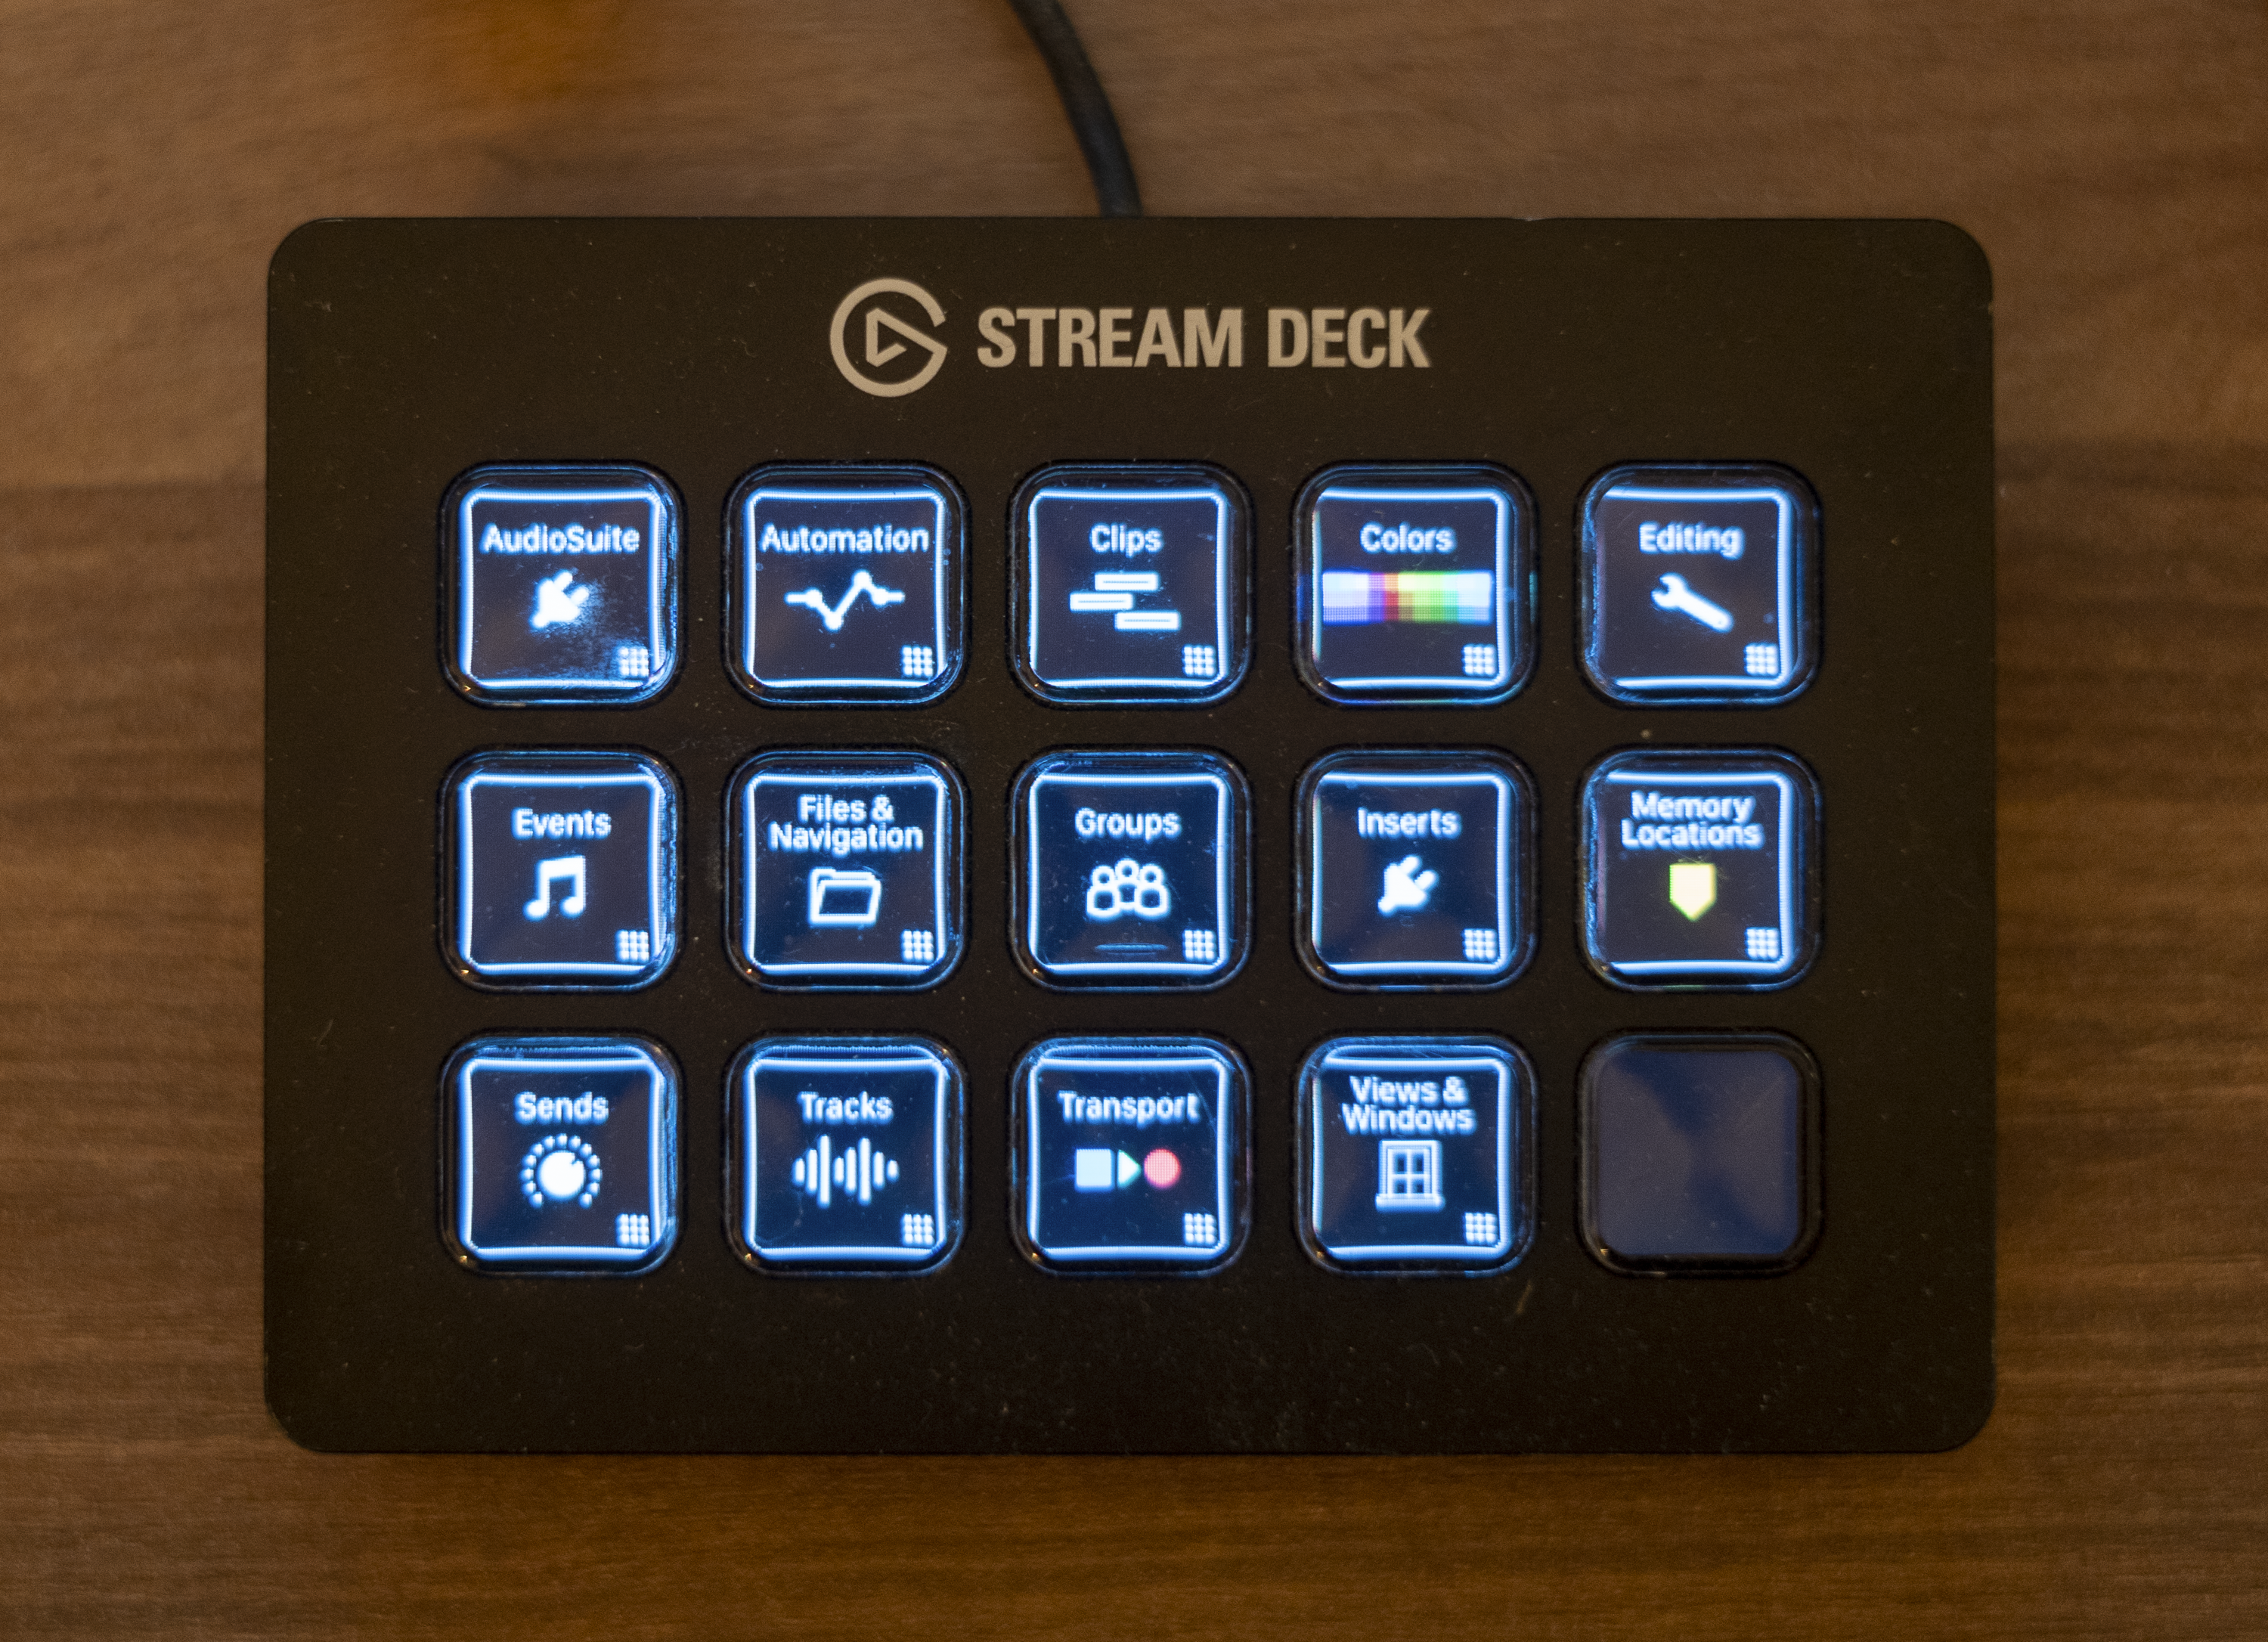 Get hands on control with a Stream Deck